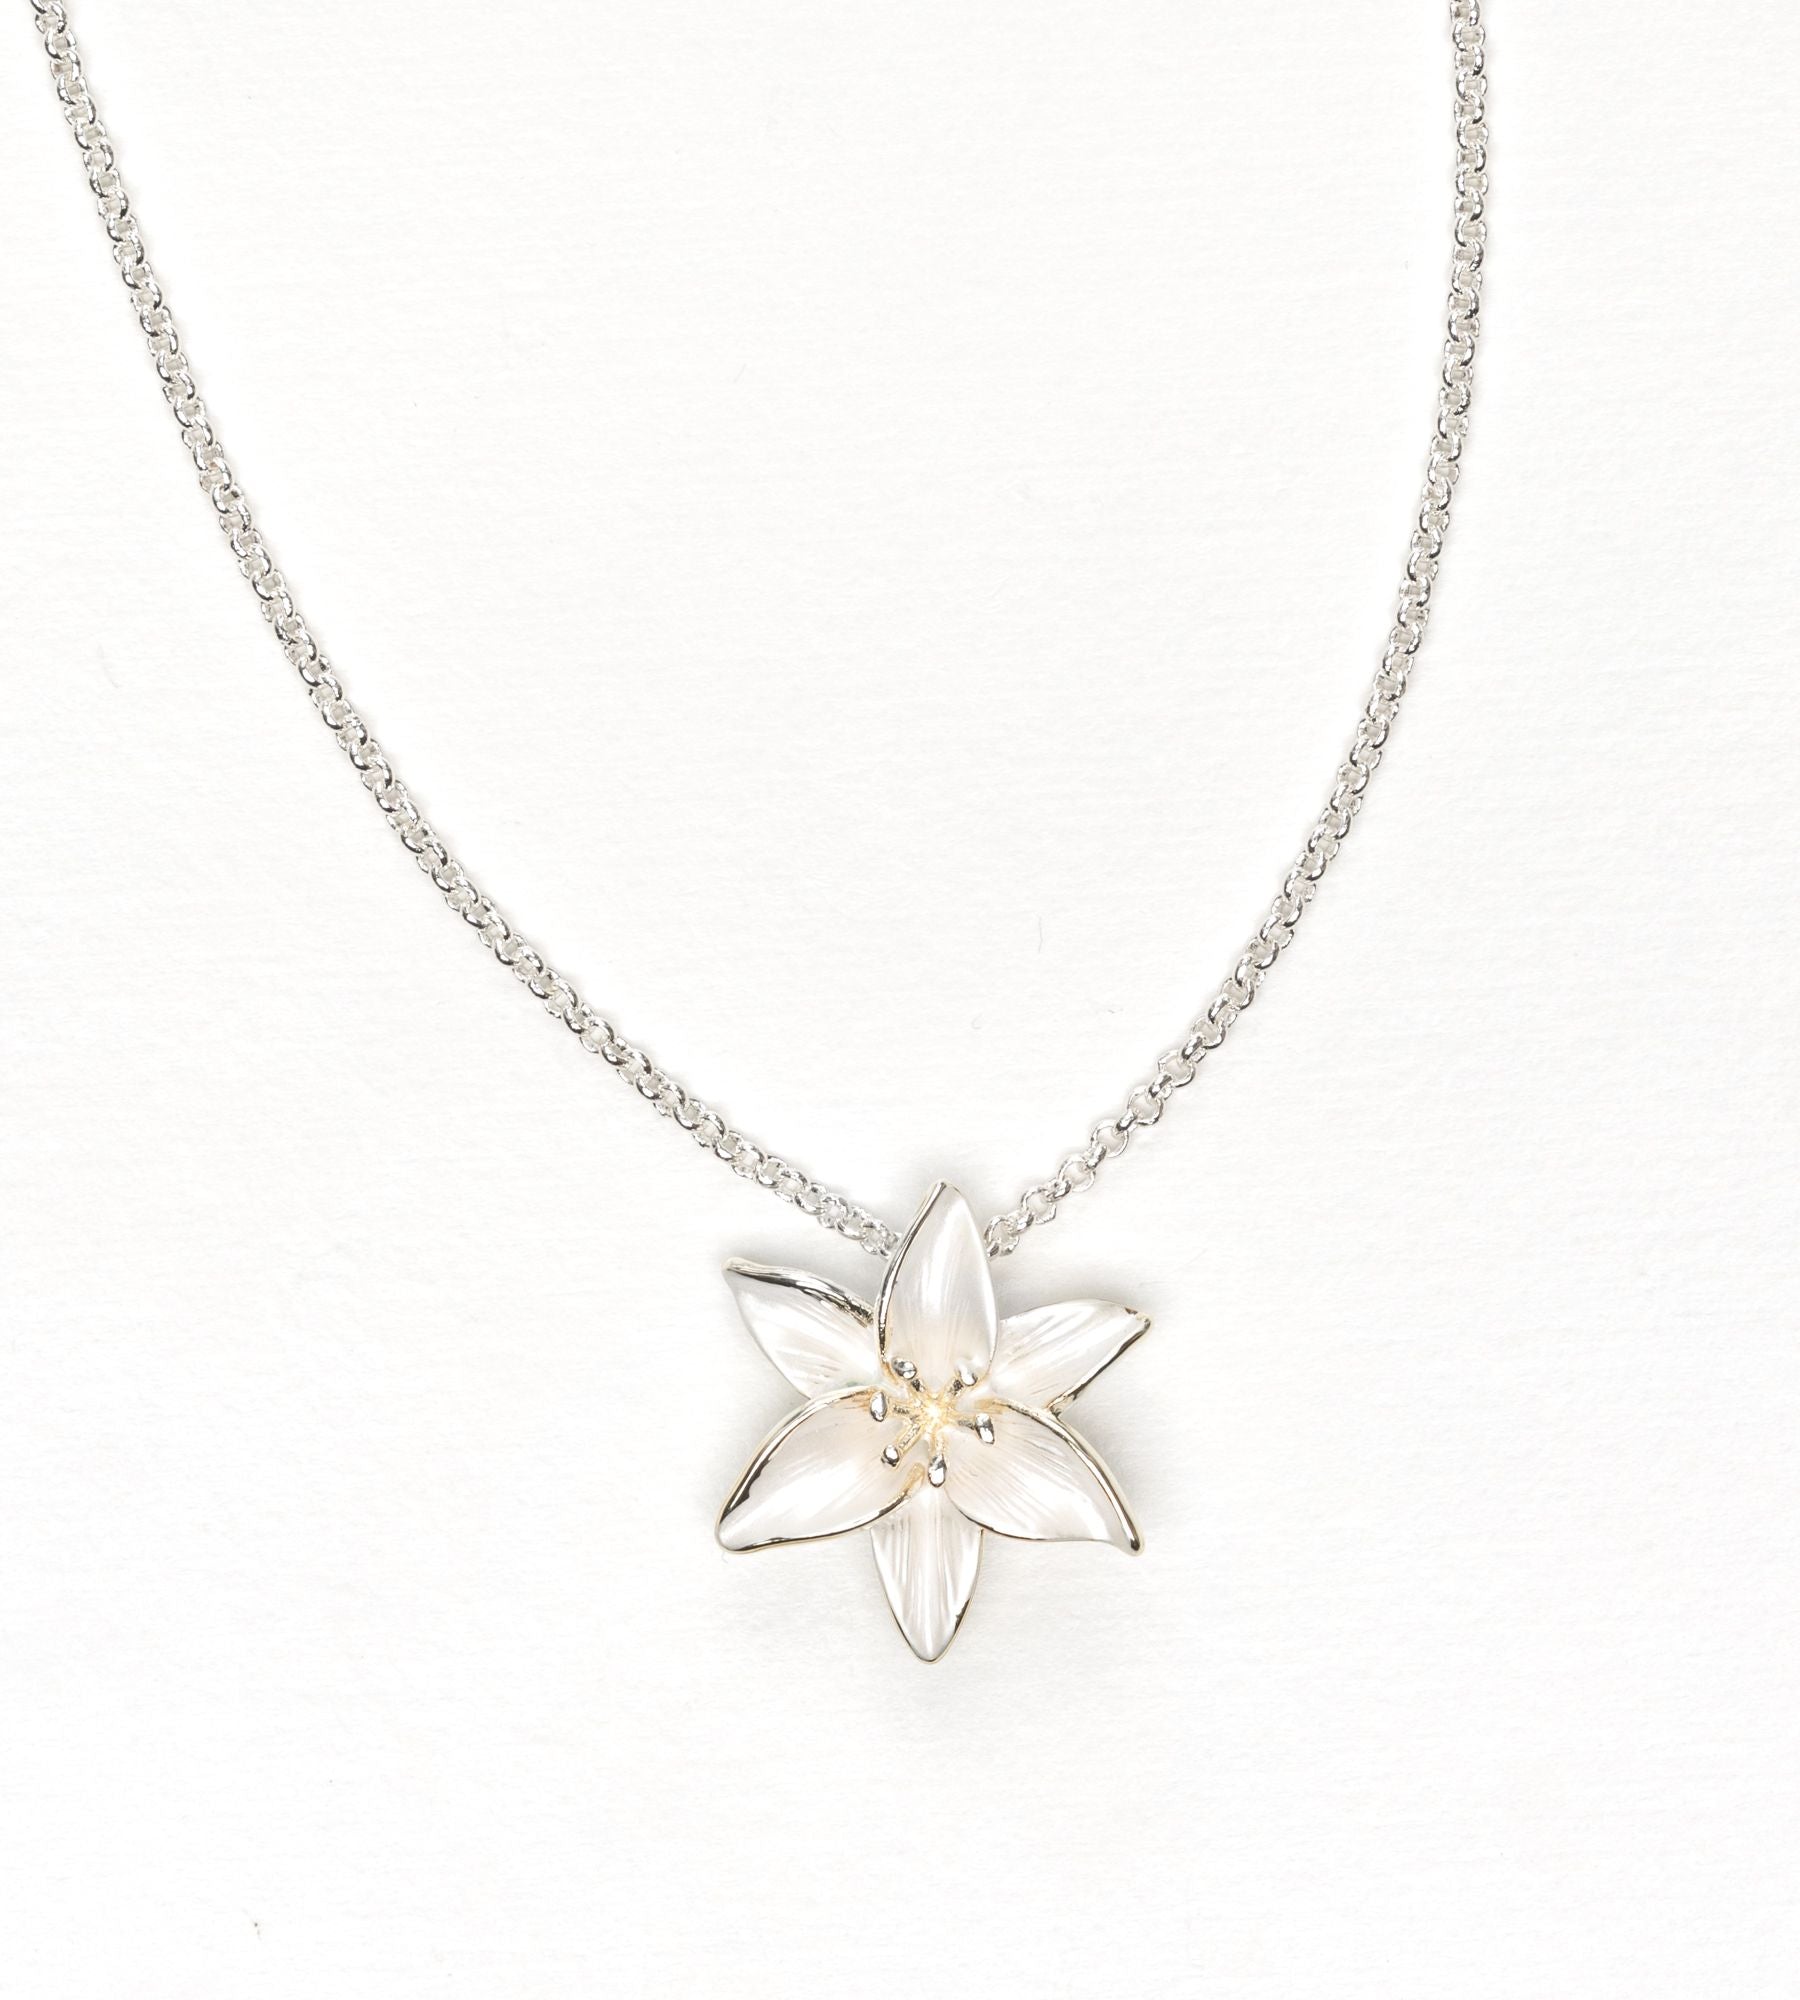 Enamel lily pendant on silver-plated chain